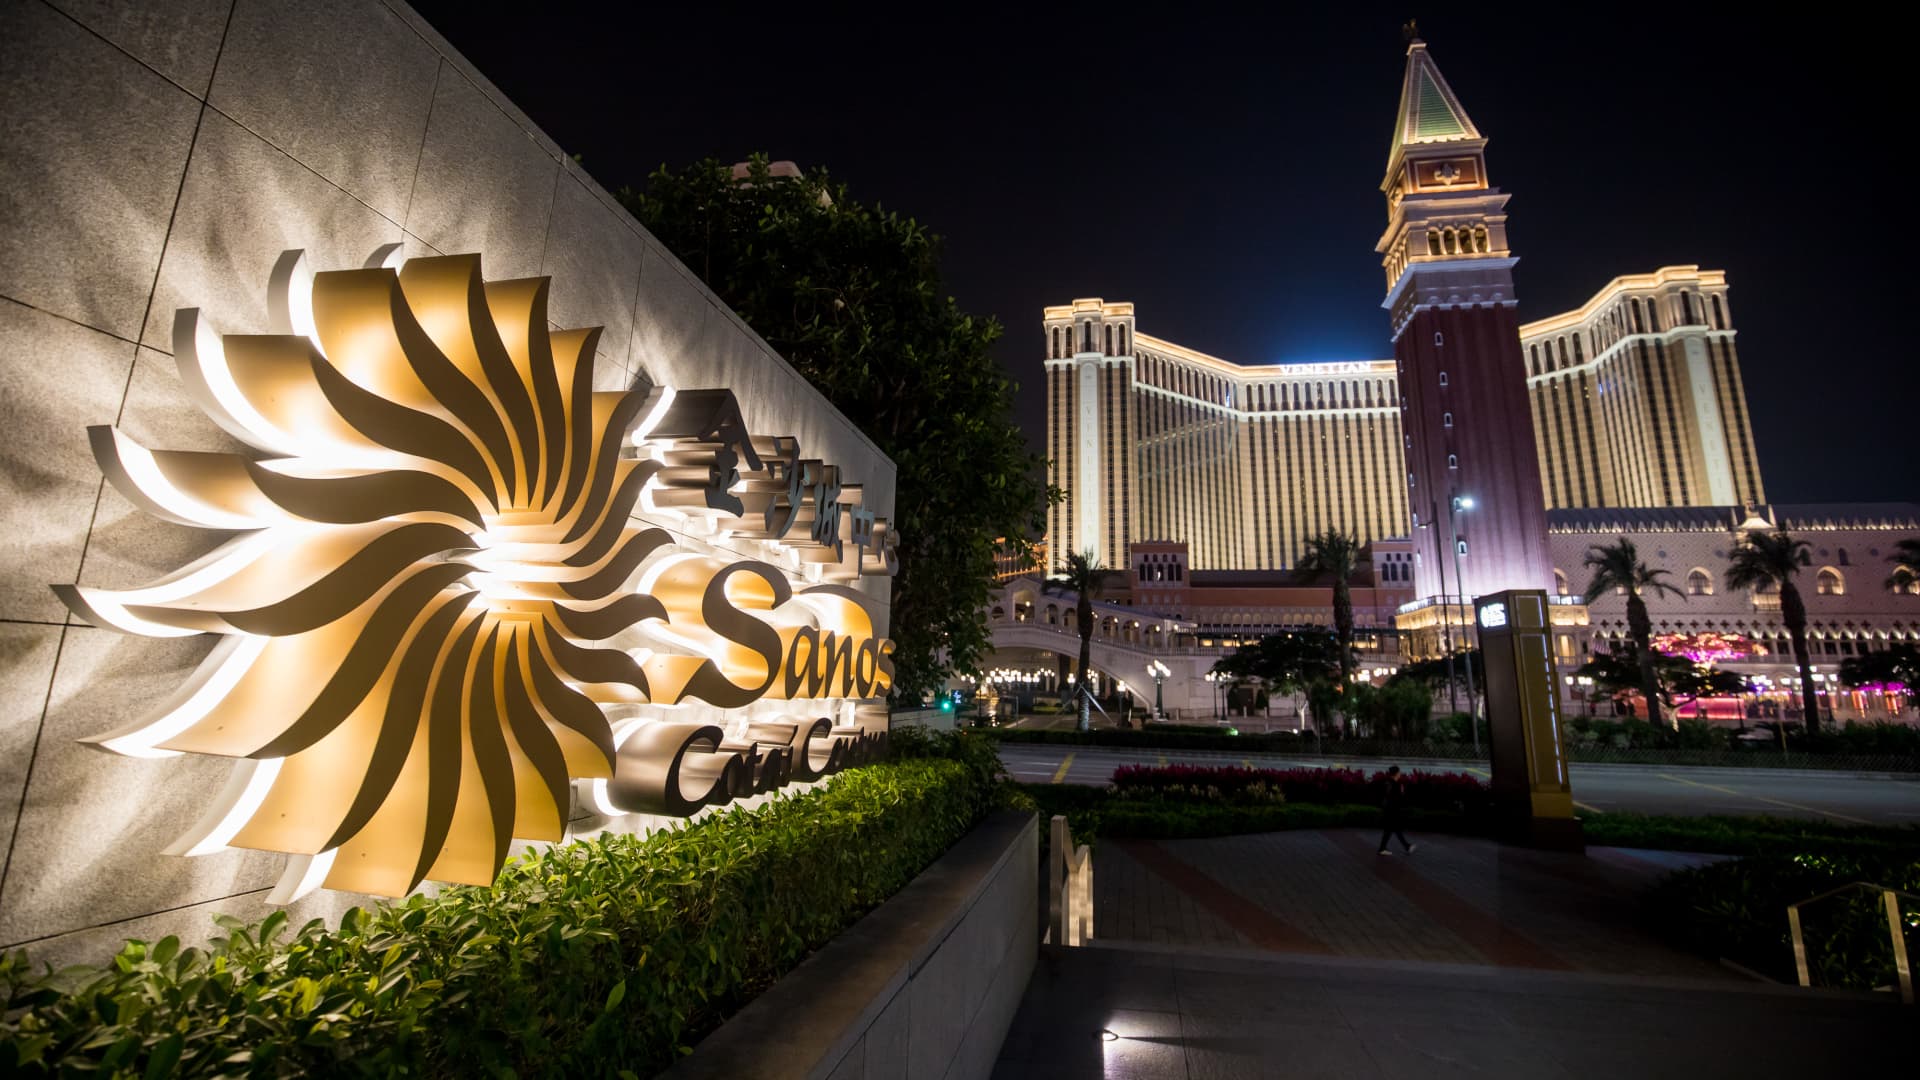 Signage for the Sands Cotai Central casino resort, operated by Sands China Ltd., a unit of Las Vegas Sands, in Macau, China, on Jan. 17, 2019.